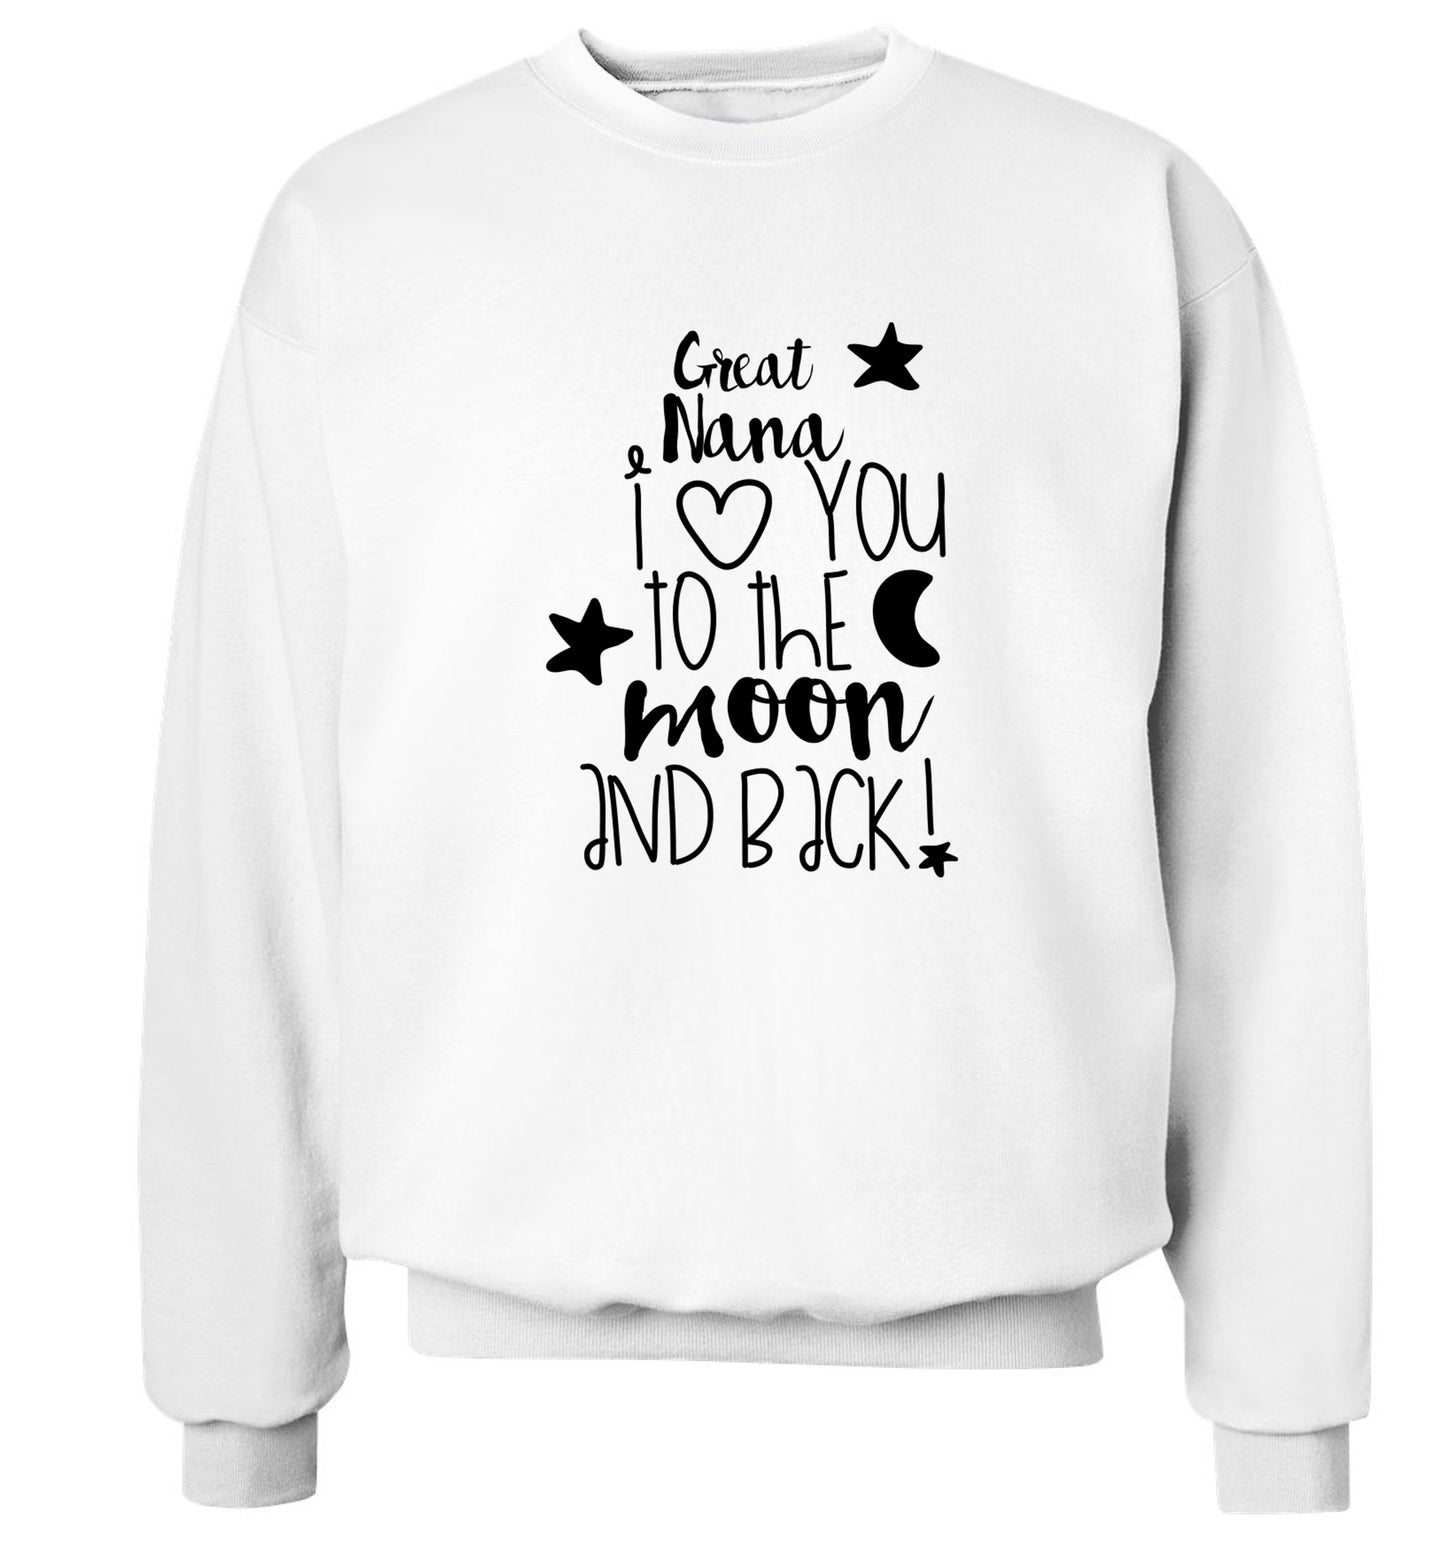 Great Nana I love you to the moon and back Adult's unisex white  sweater 2XL